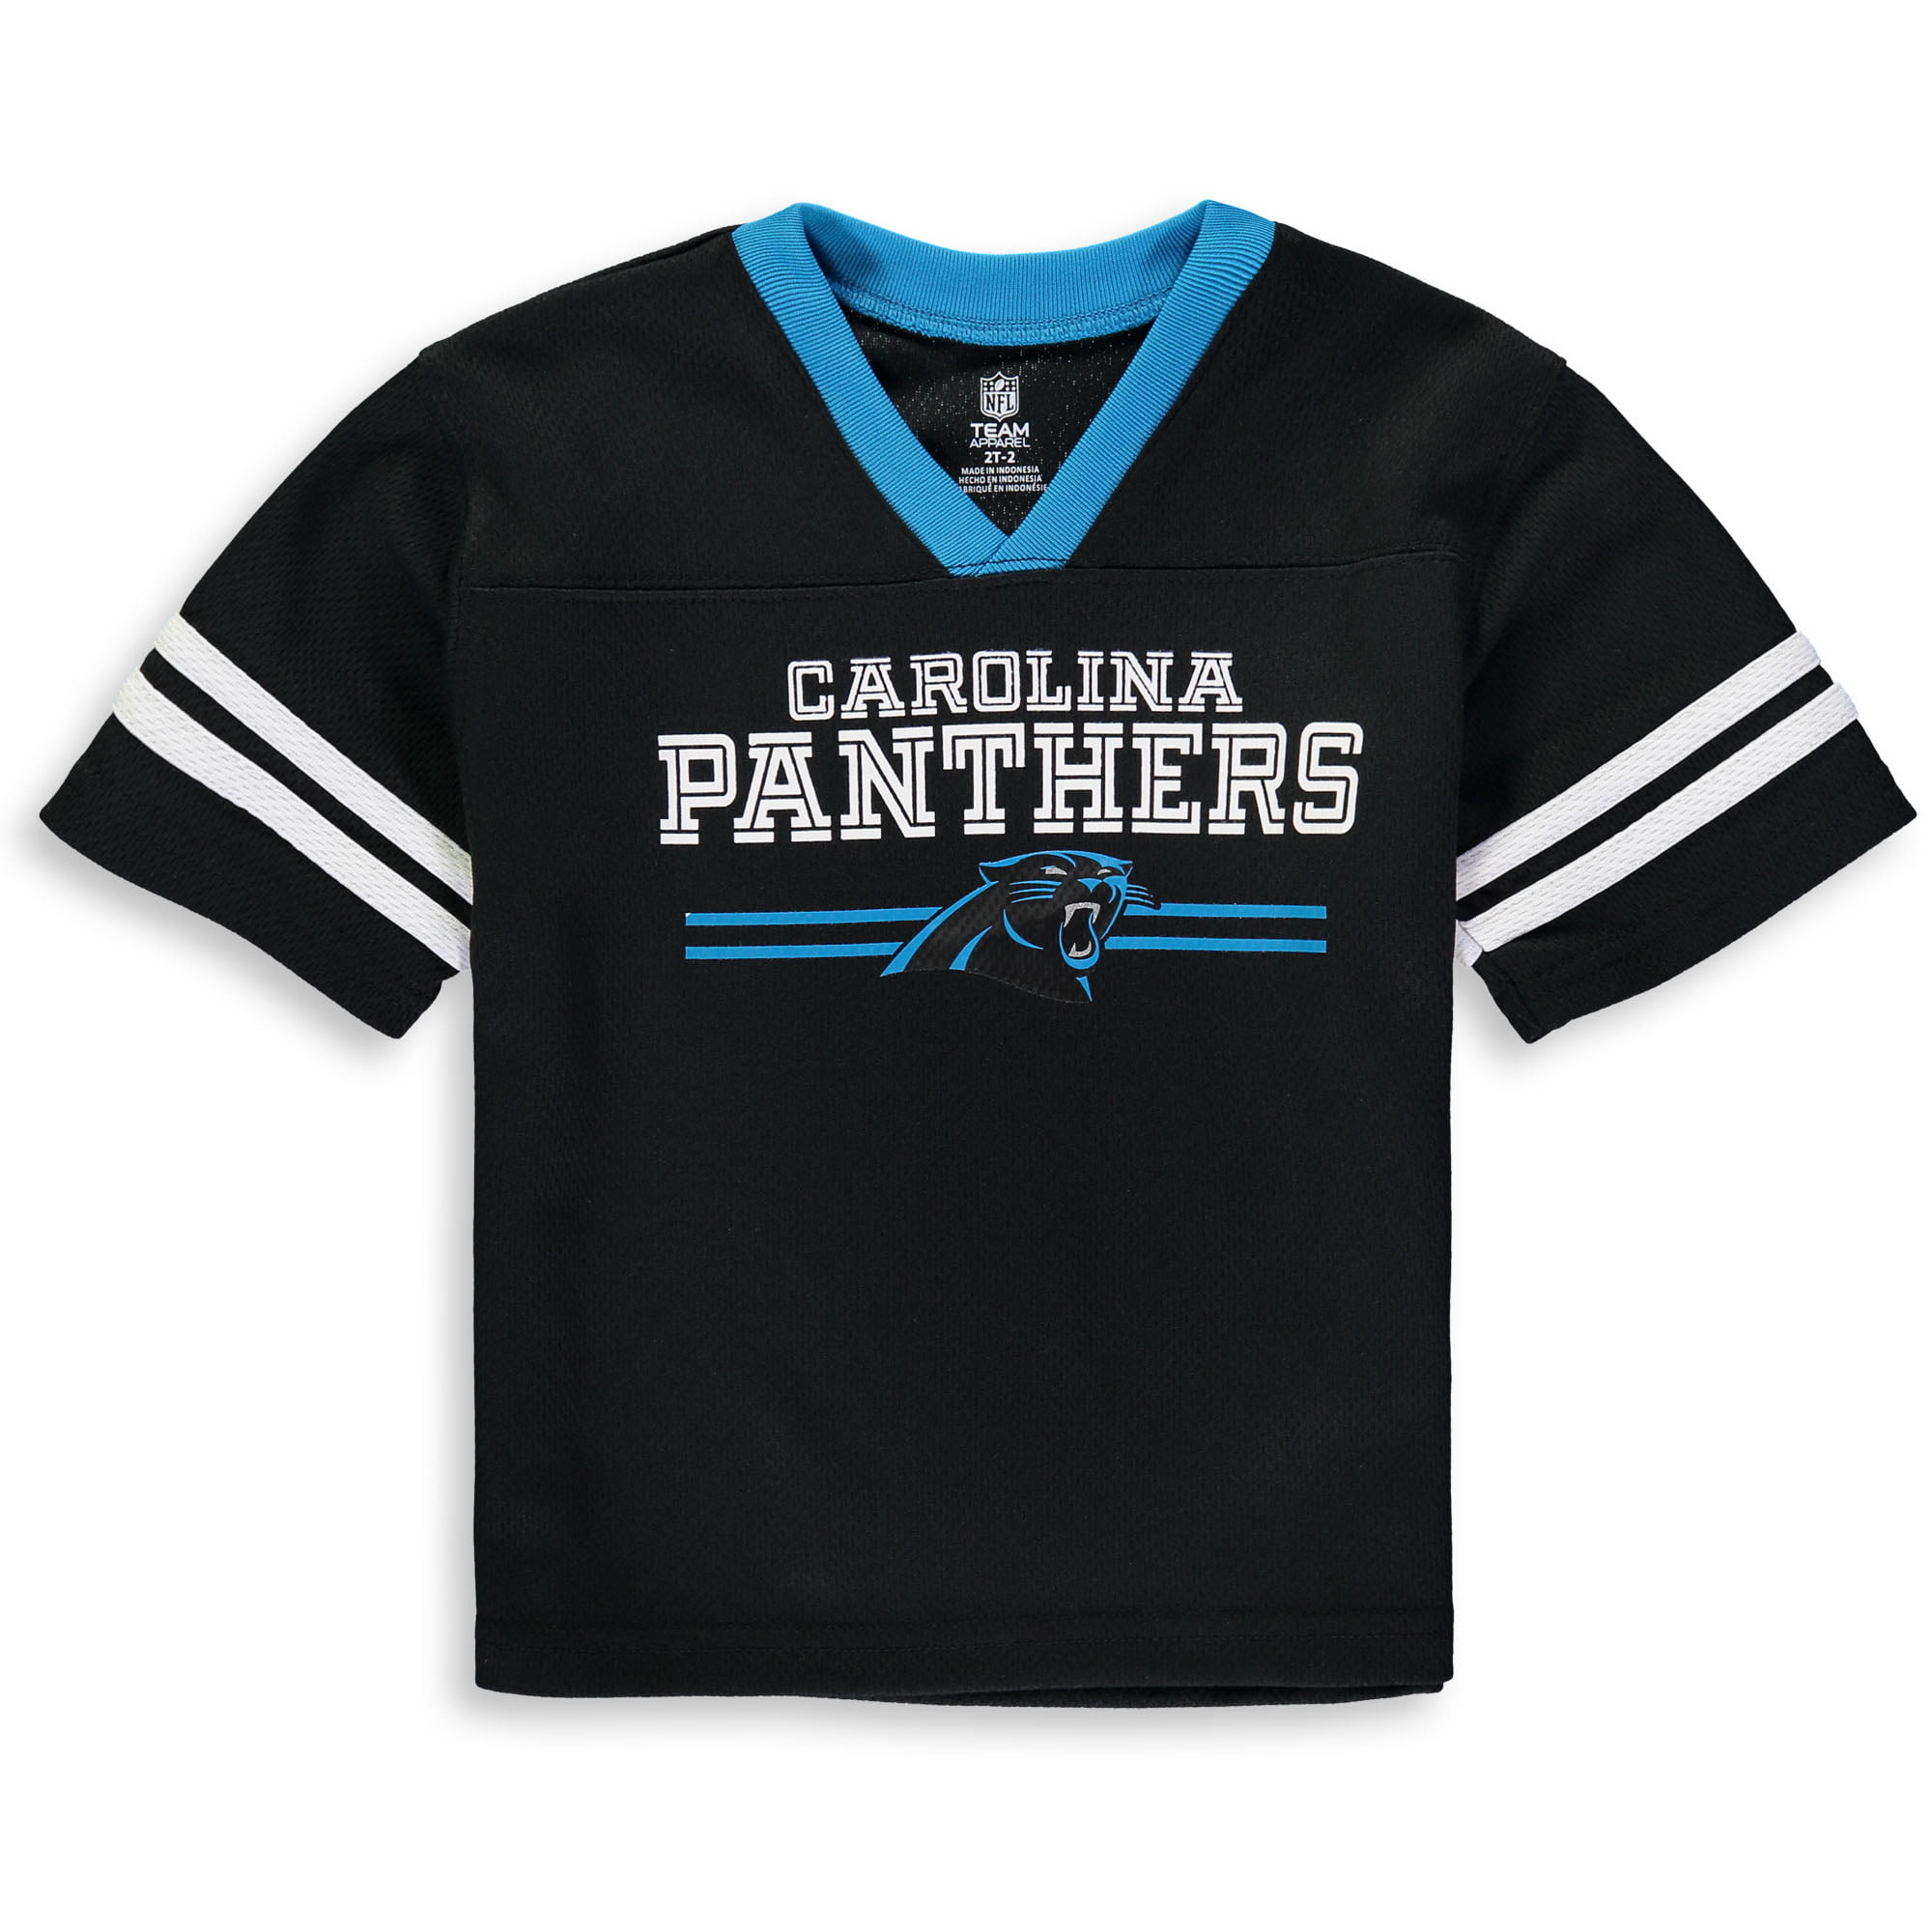 2t panthers jersey